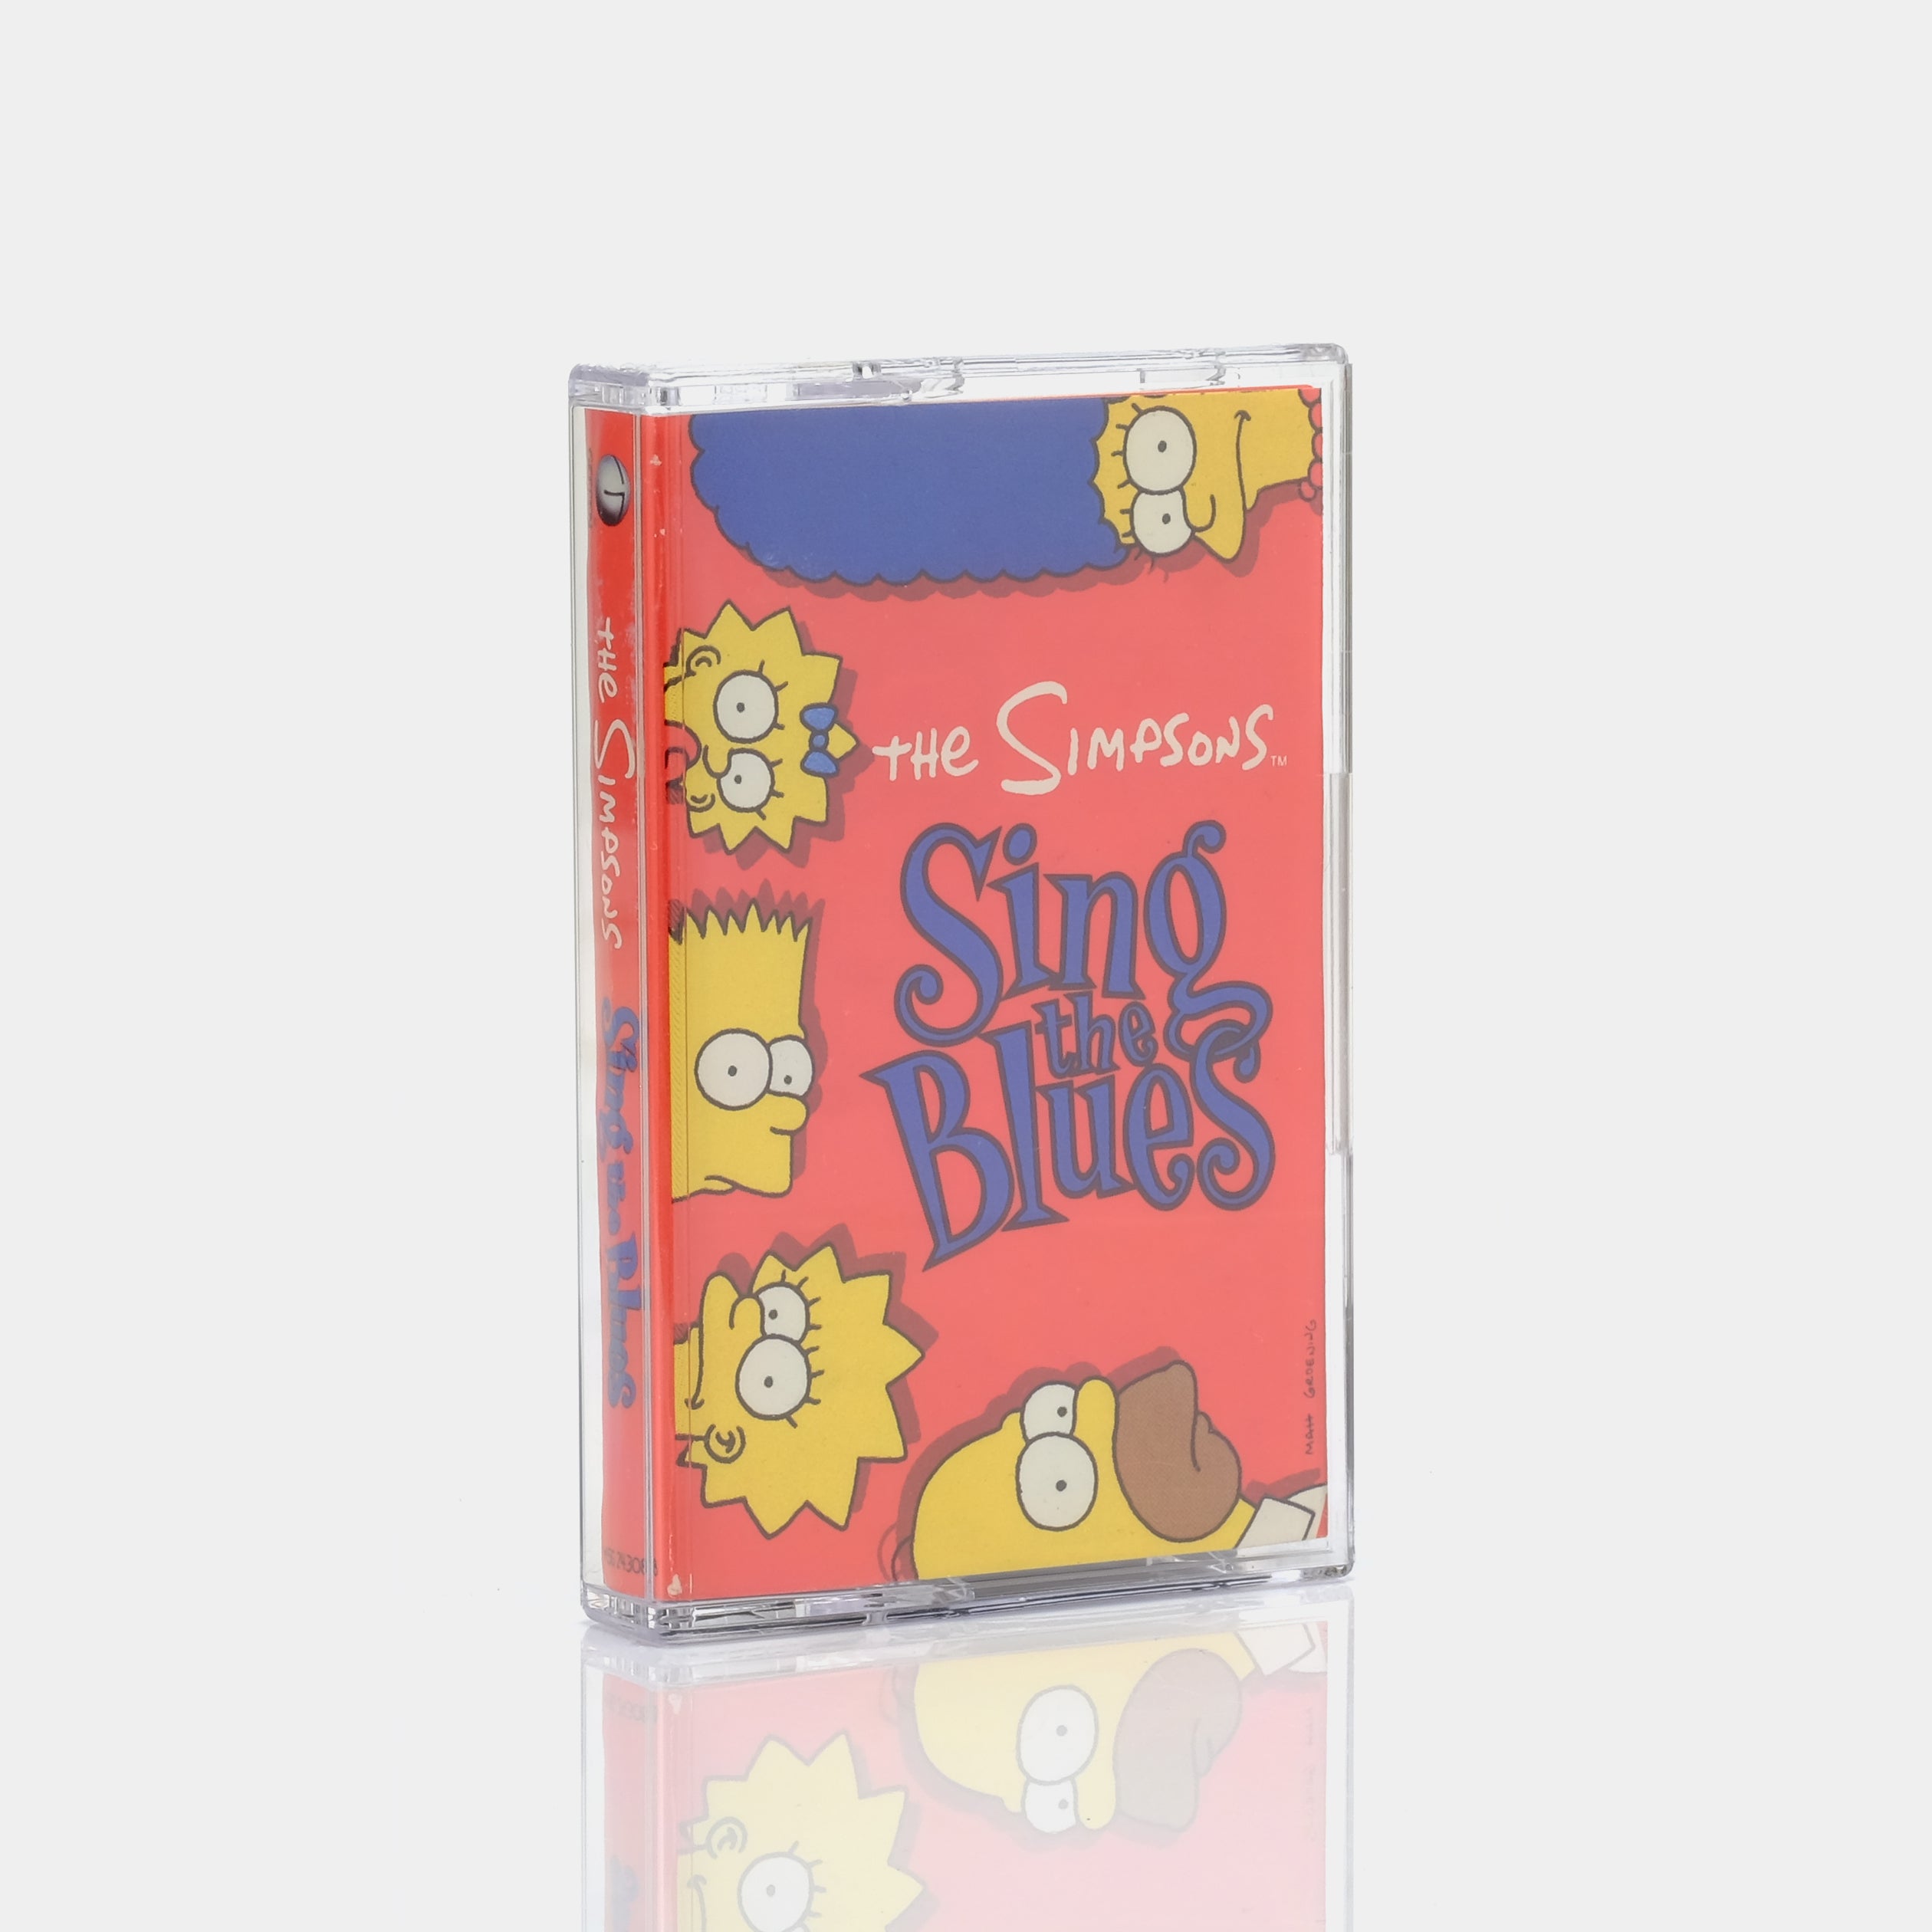 The Simpsons - The Simpsons Sing The Blues Cassette Tape